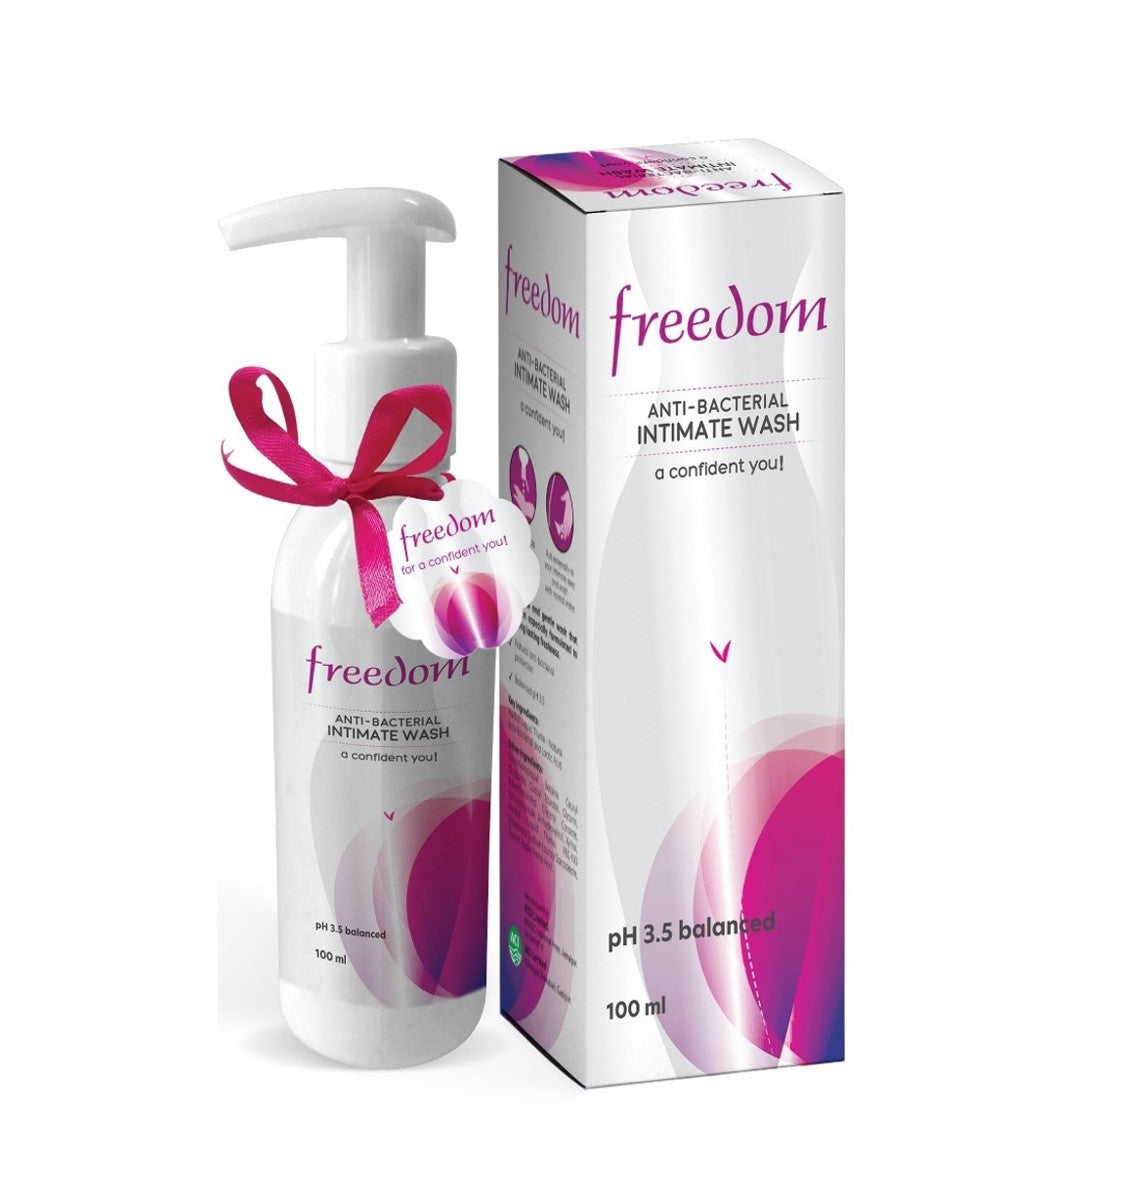 Freedom Anti-Bacterial Intimate Wash (100ml)